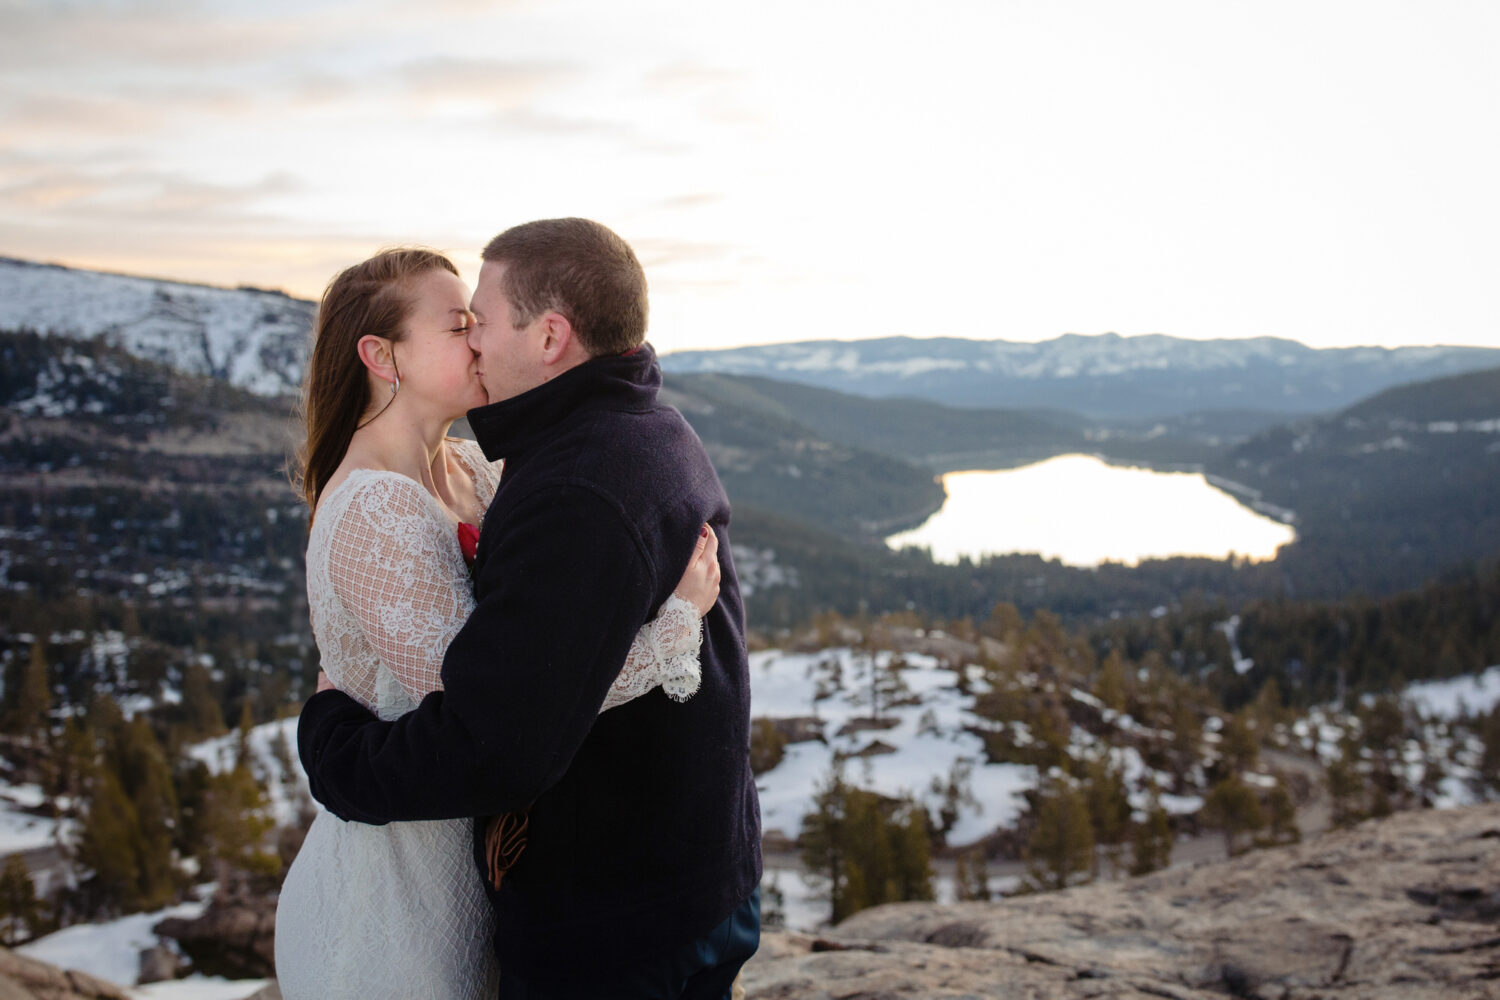 Eloping on a mountain in Lake Tahoe during winter with snow in the background.